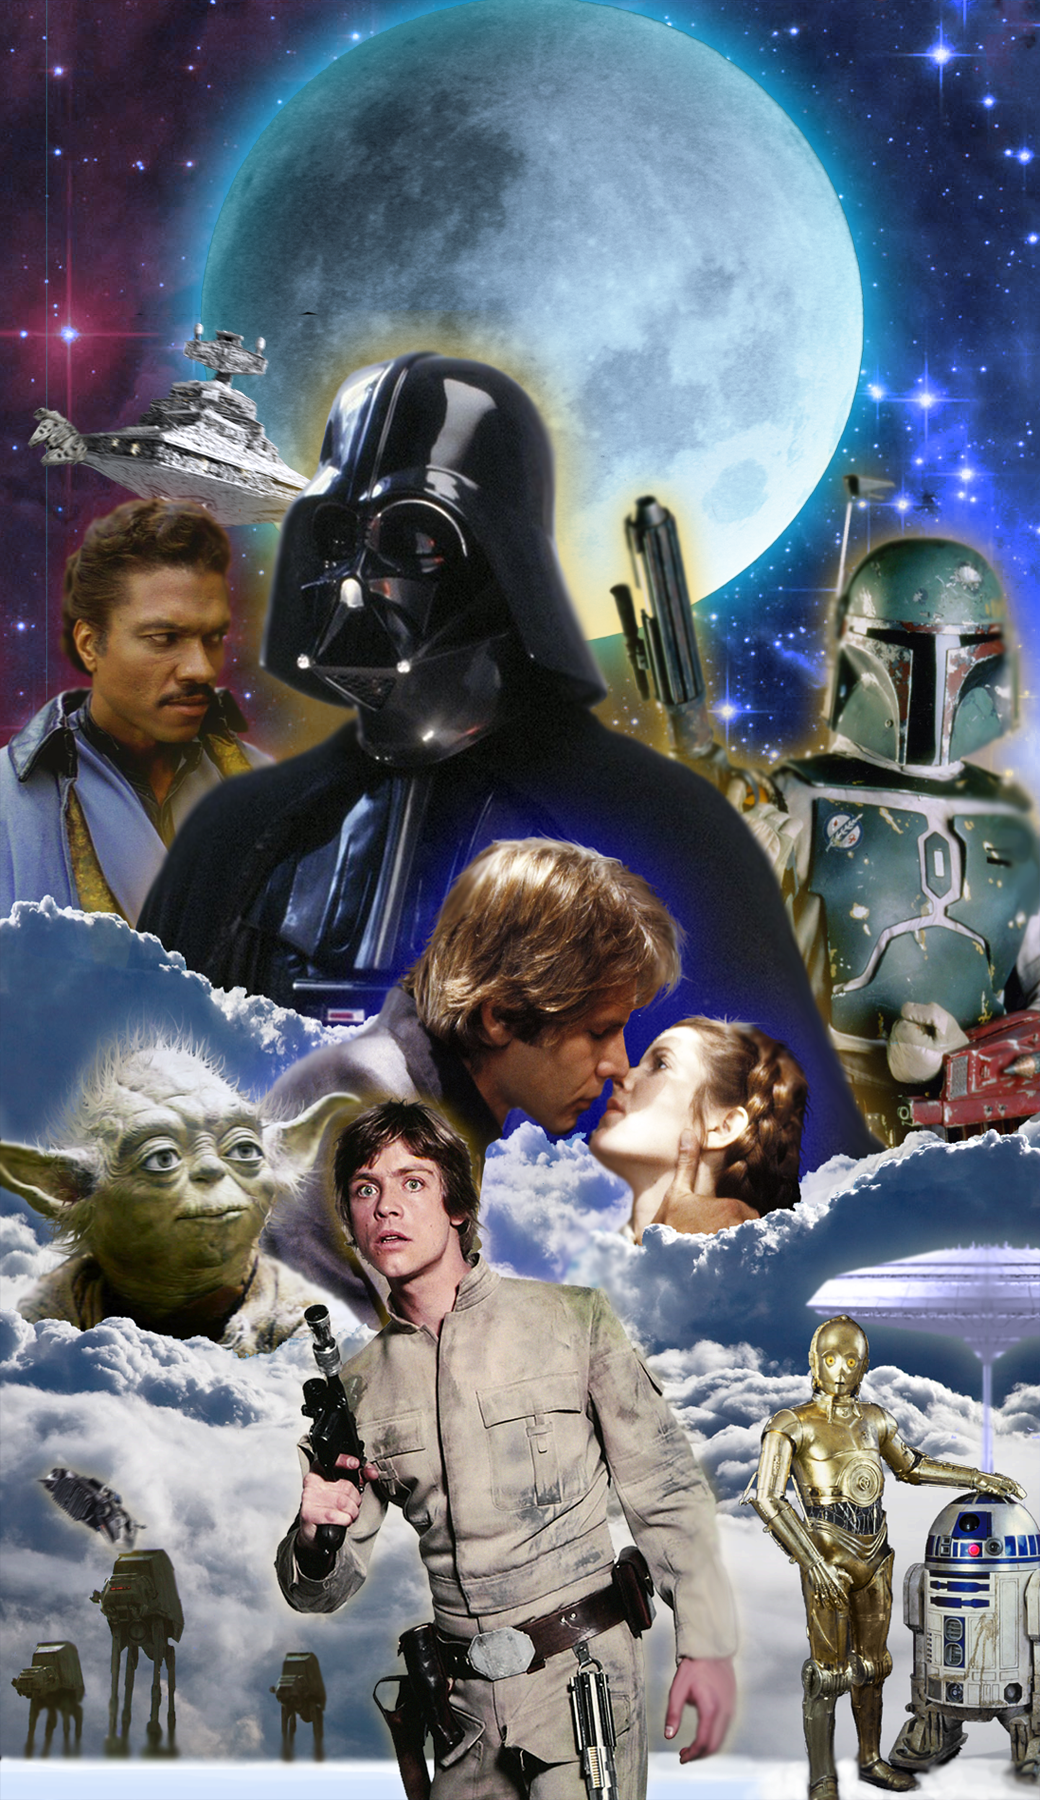 Empire Strikes Back Poster 1 by LifeJuiceSFF on DeviantArt